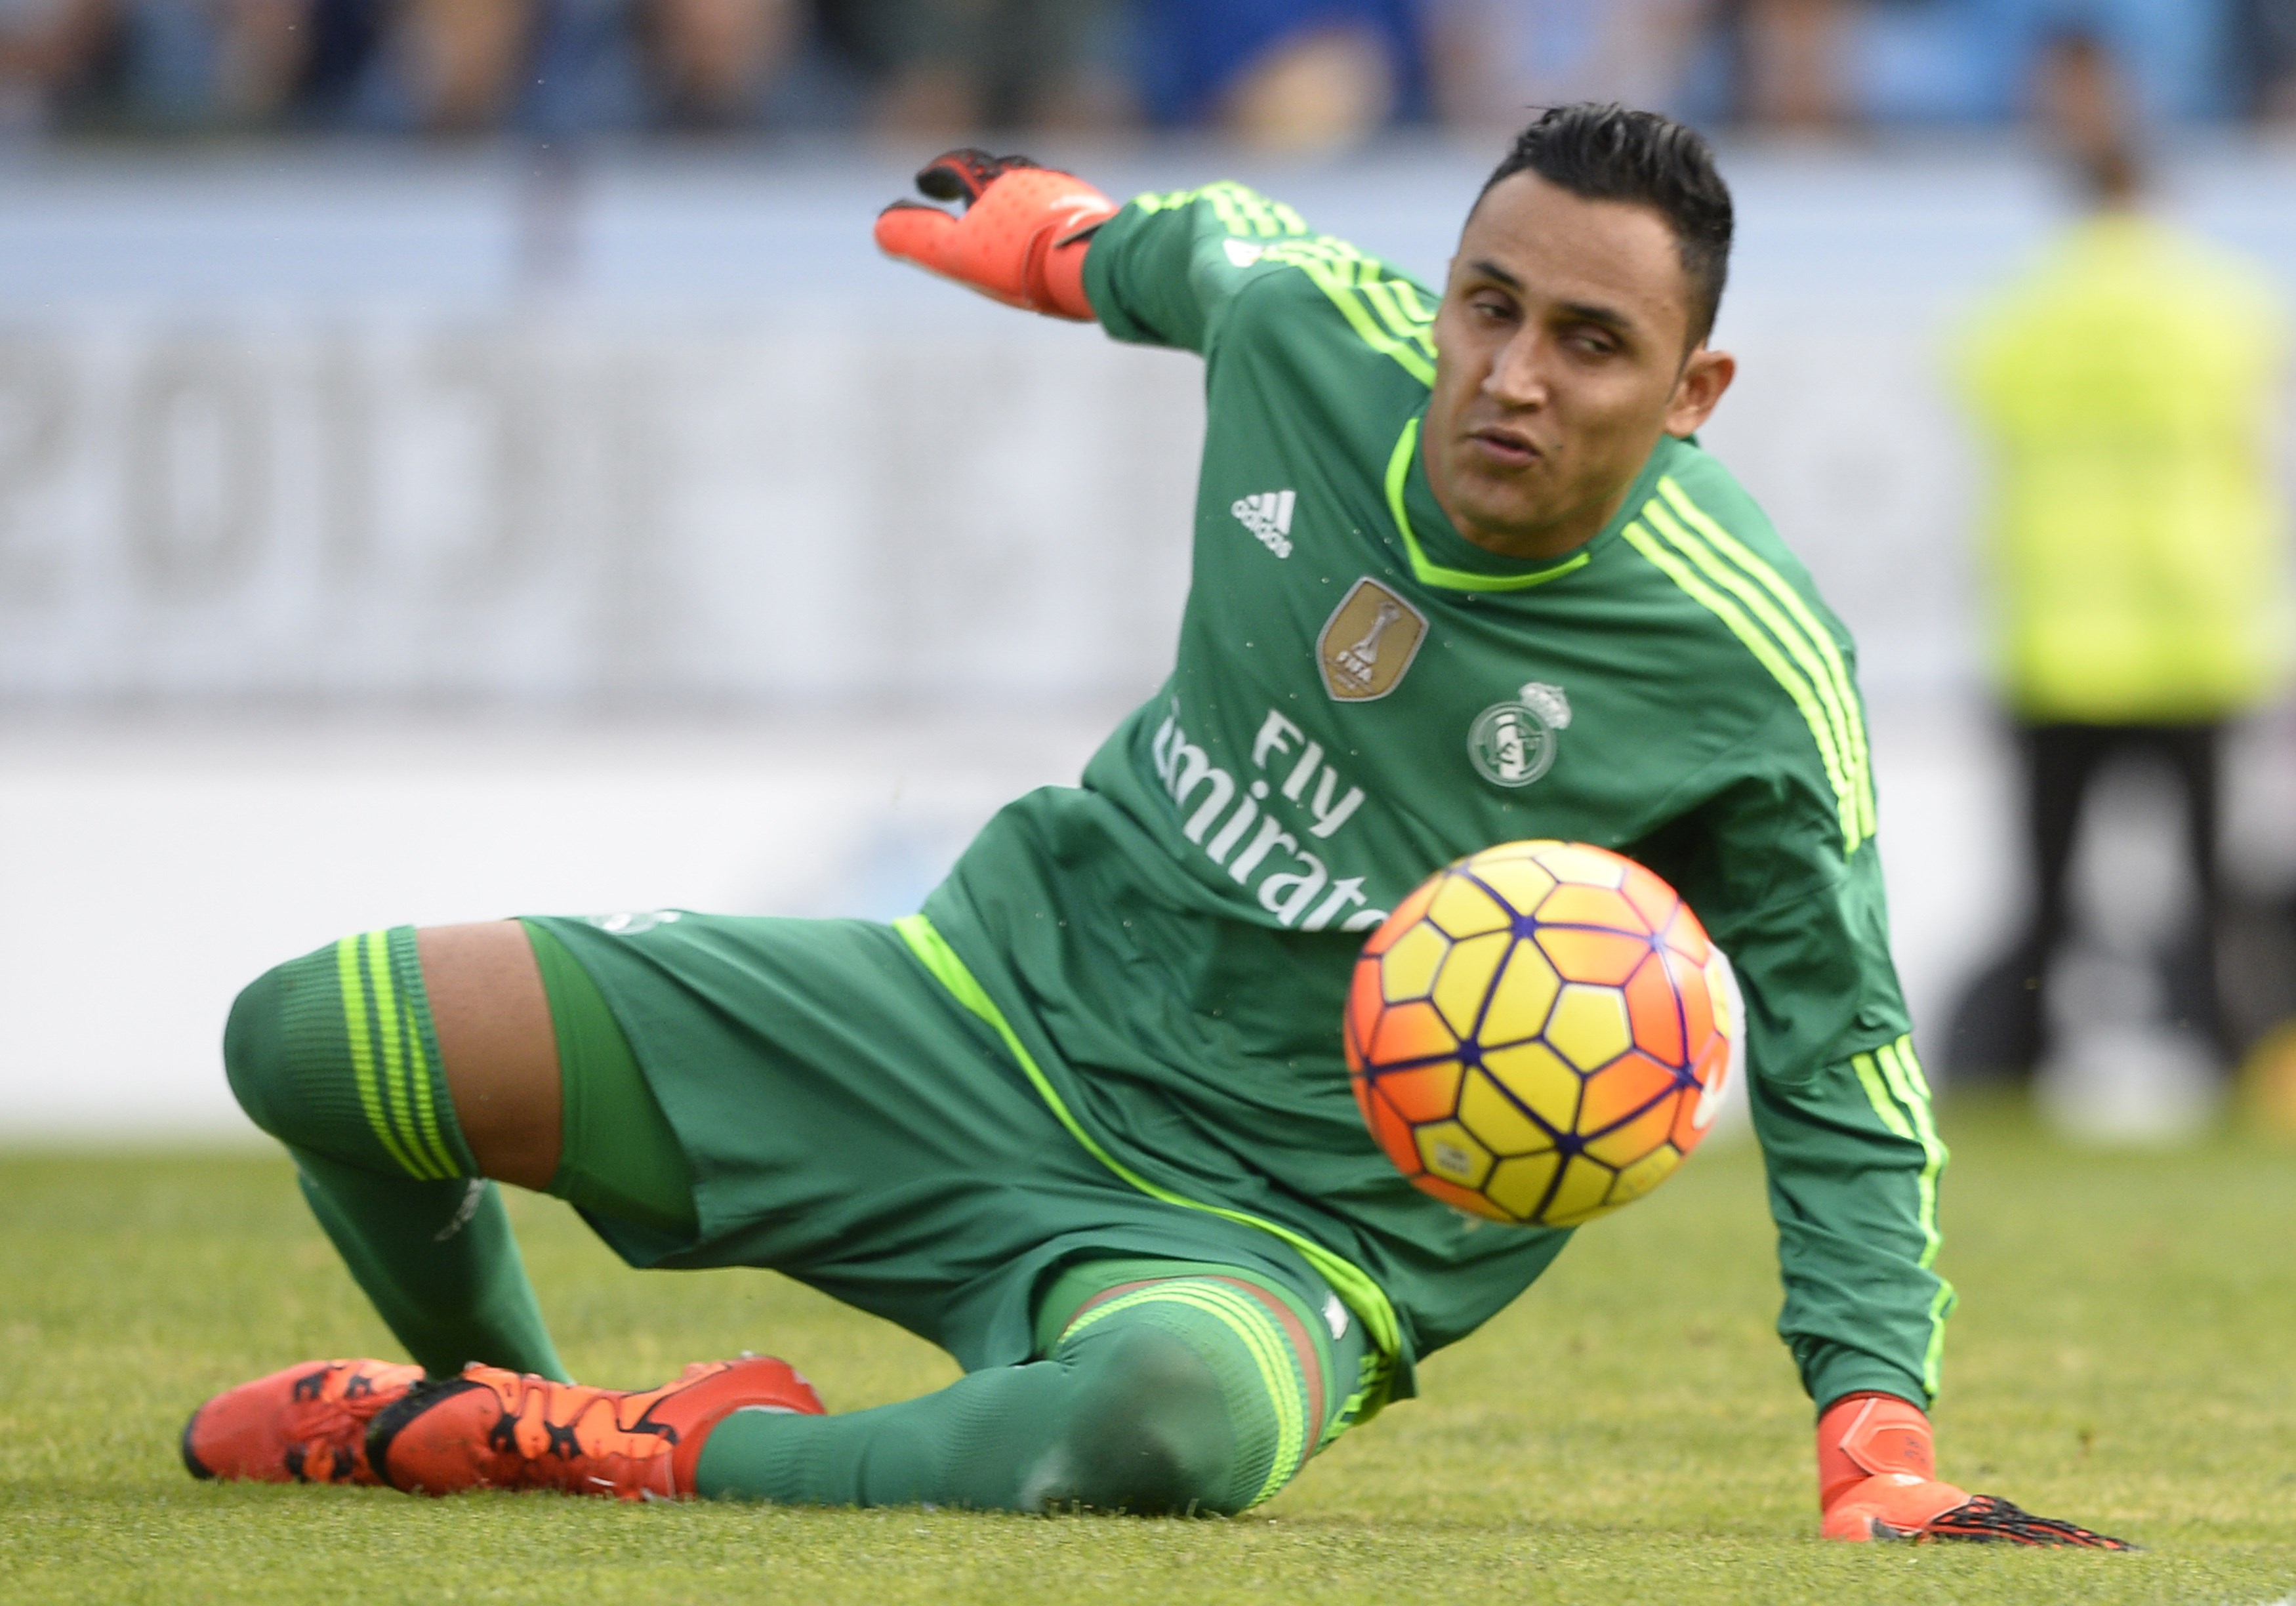 Keylor Navas has yet to allow a goal in UCL play. (Getty)